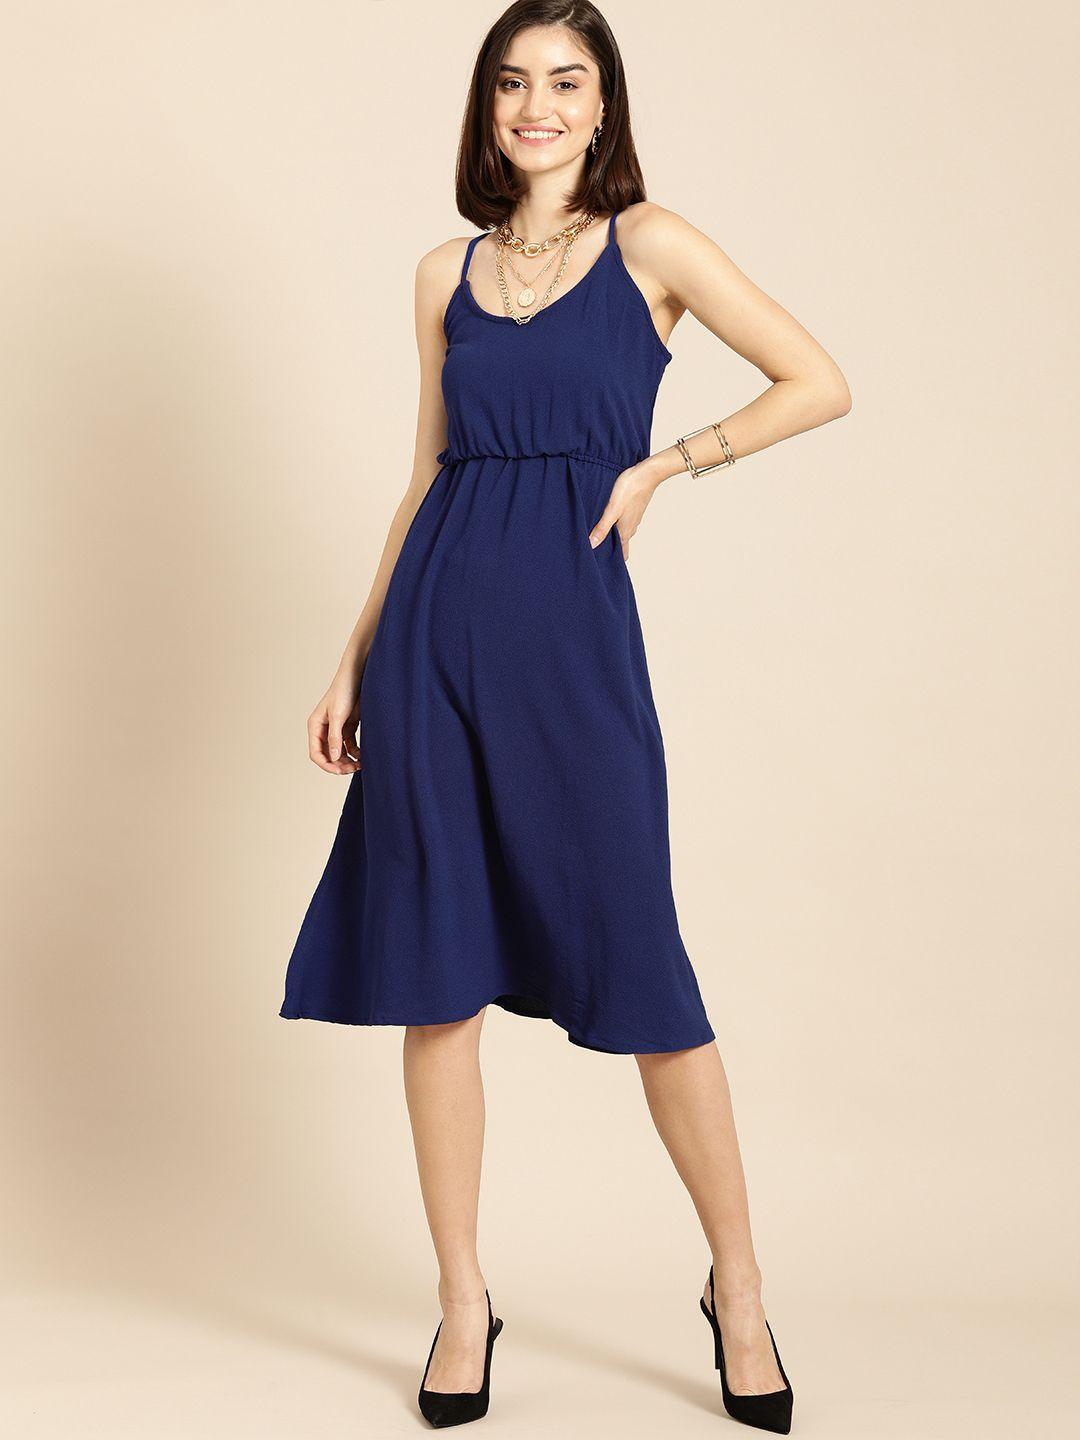 all about you navy blue shoulder strap a-line midi dress